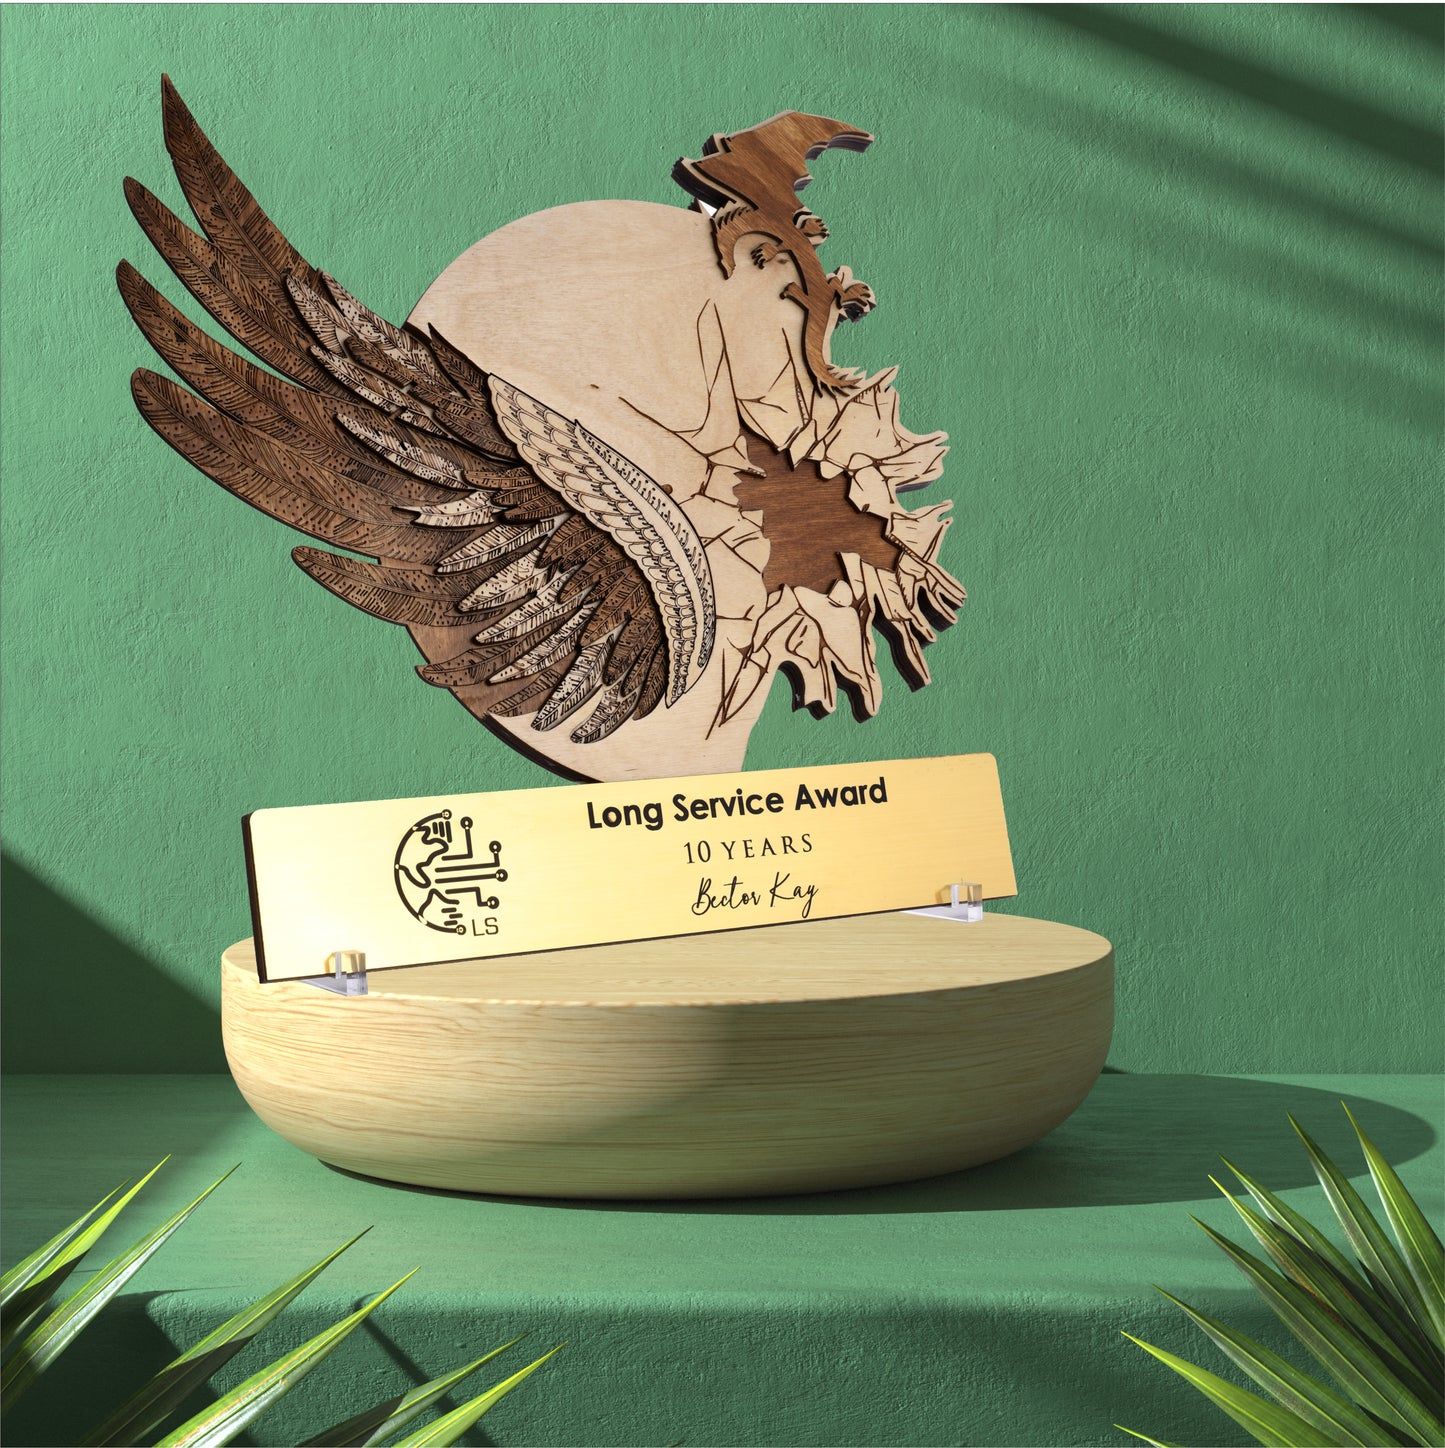 Birth of a Champion: A Wooden Trophy with a Dragon Emerging from its Egg